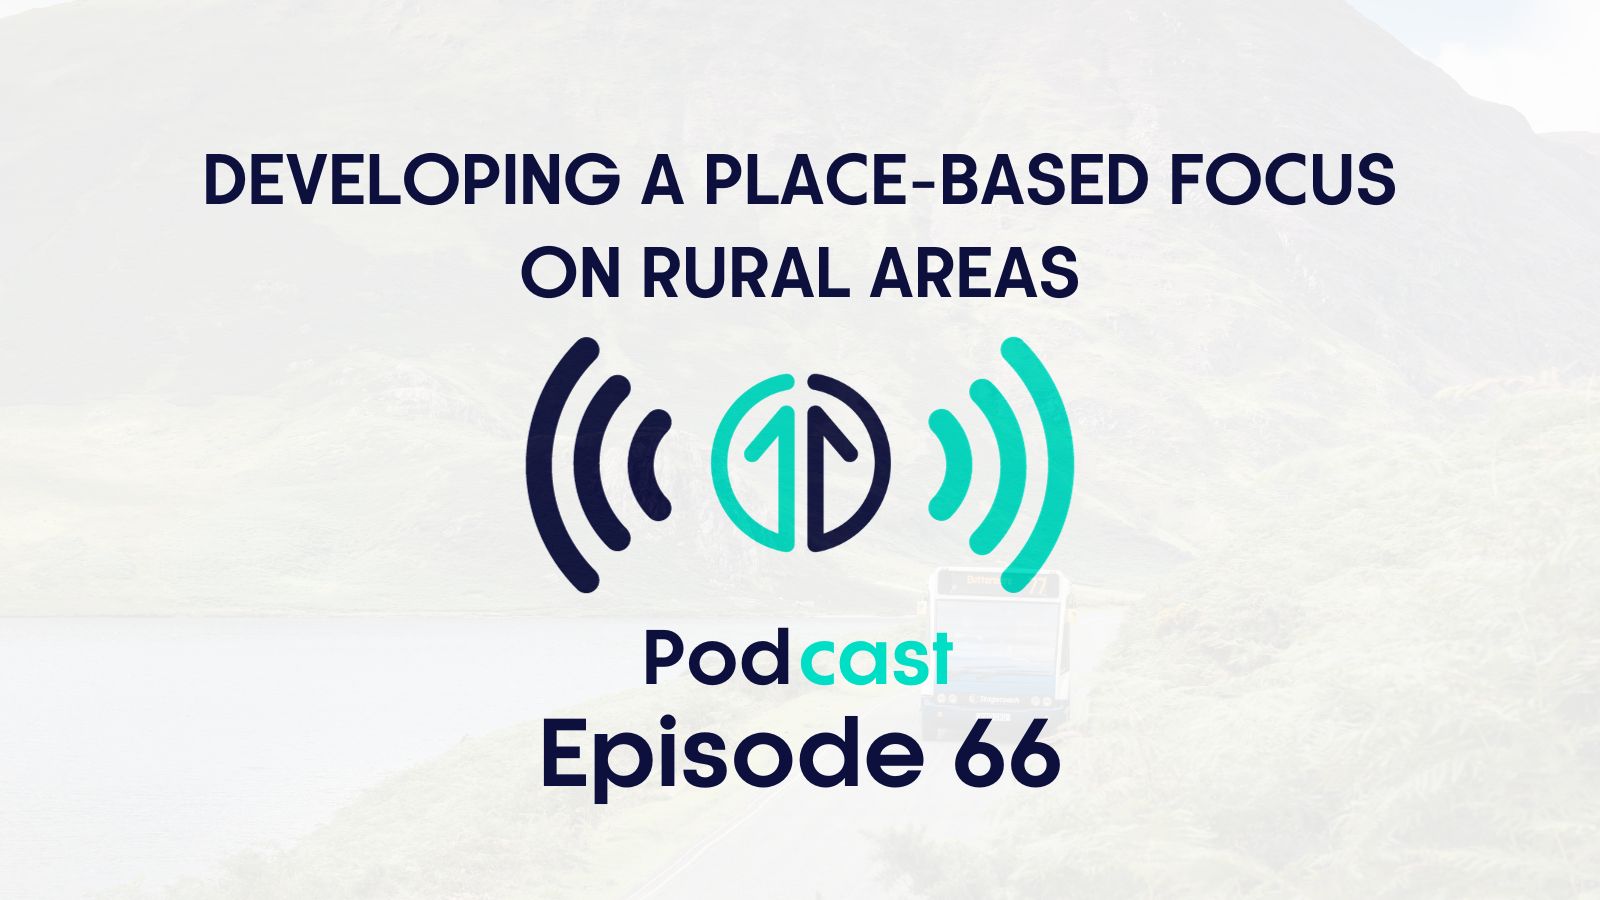 TfN Podcast episode 66 - Developing a place-based focus on rural areas